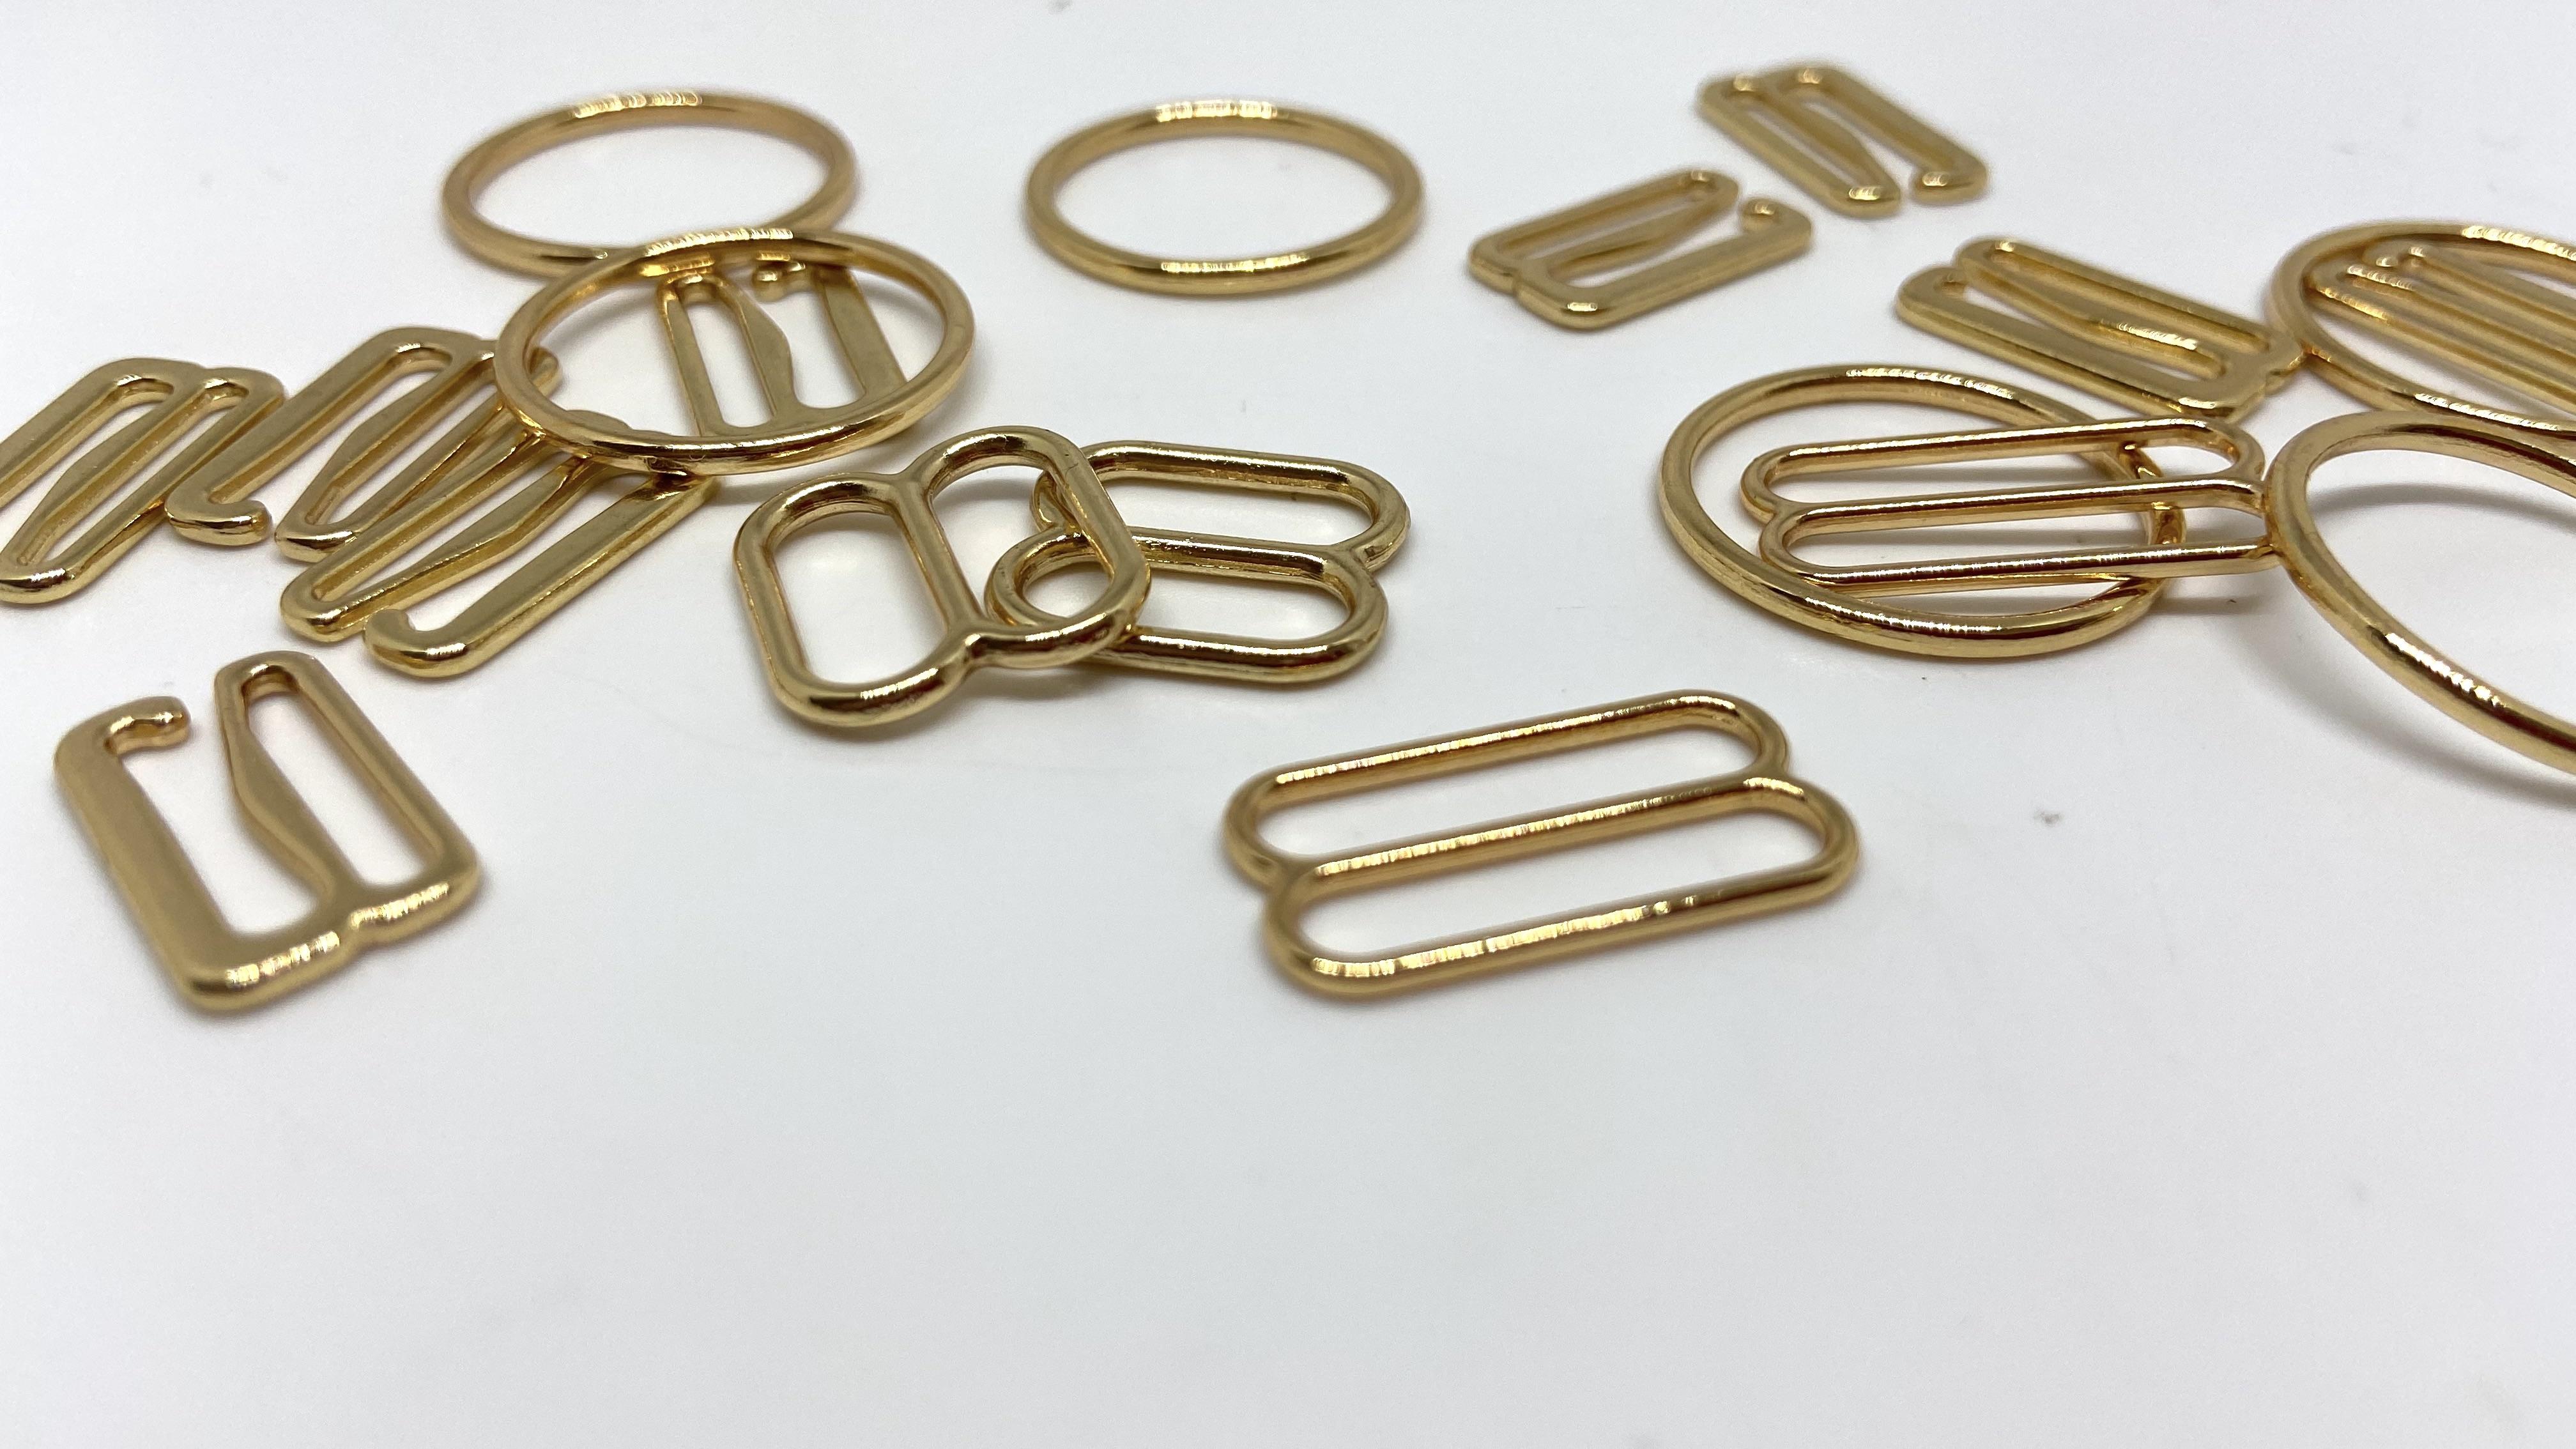 Gold shiny metal fittings for bra making